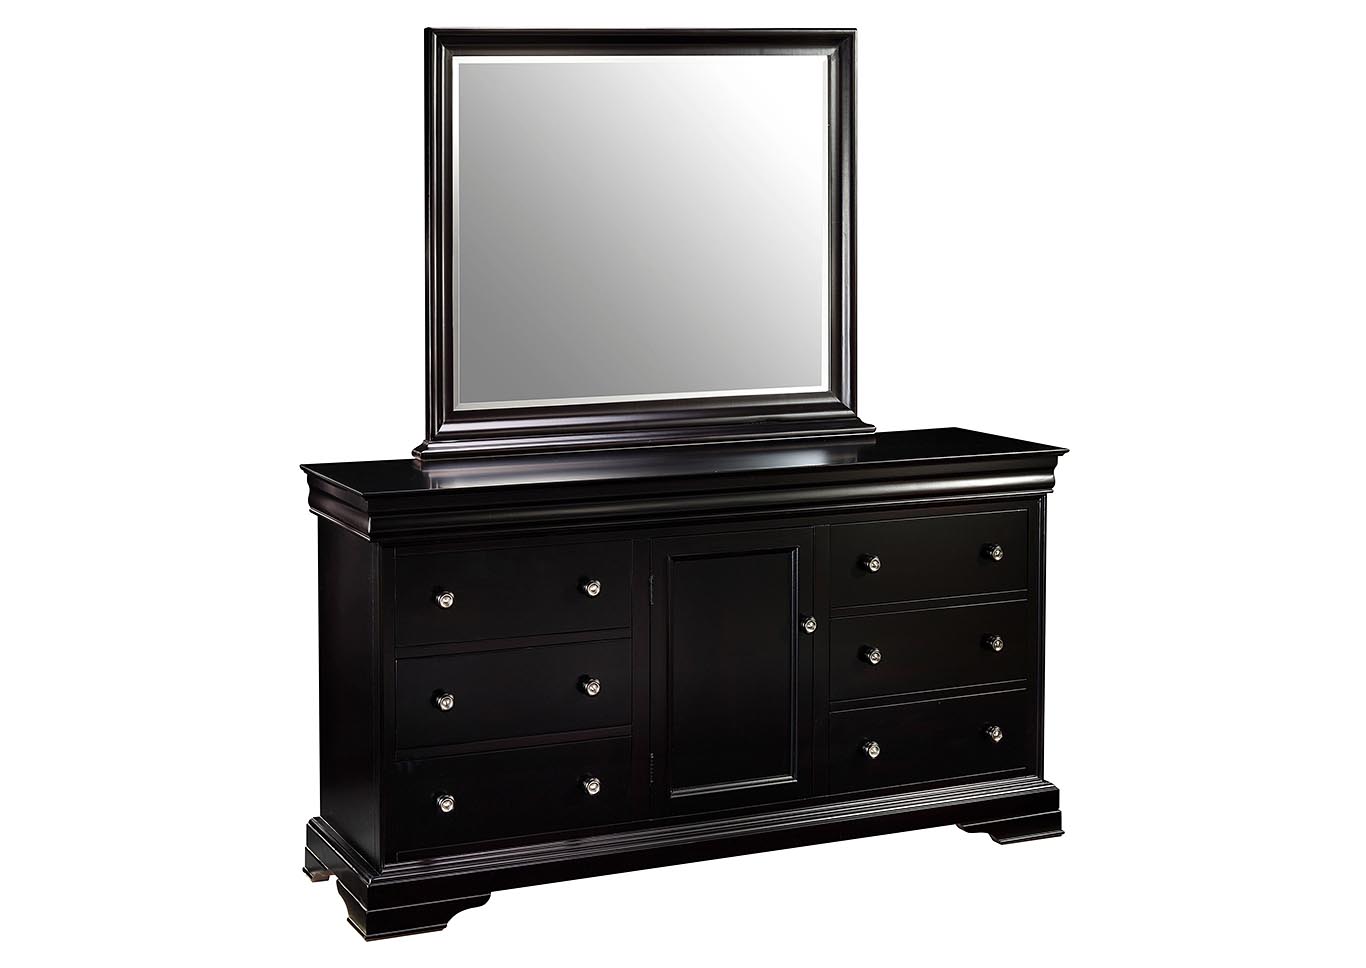 Belle Rose Black Cherry Queen Bed w/Dresser and Mirror,New Classic